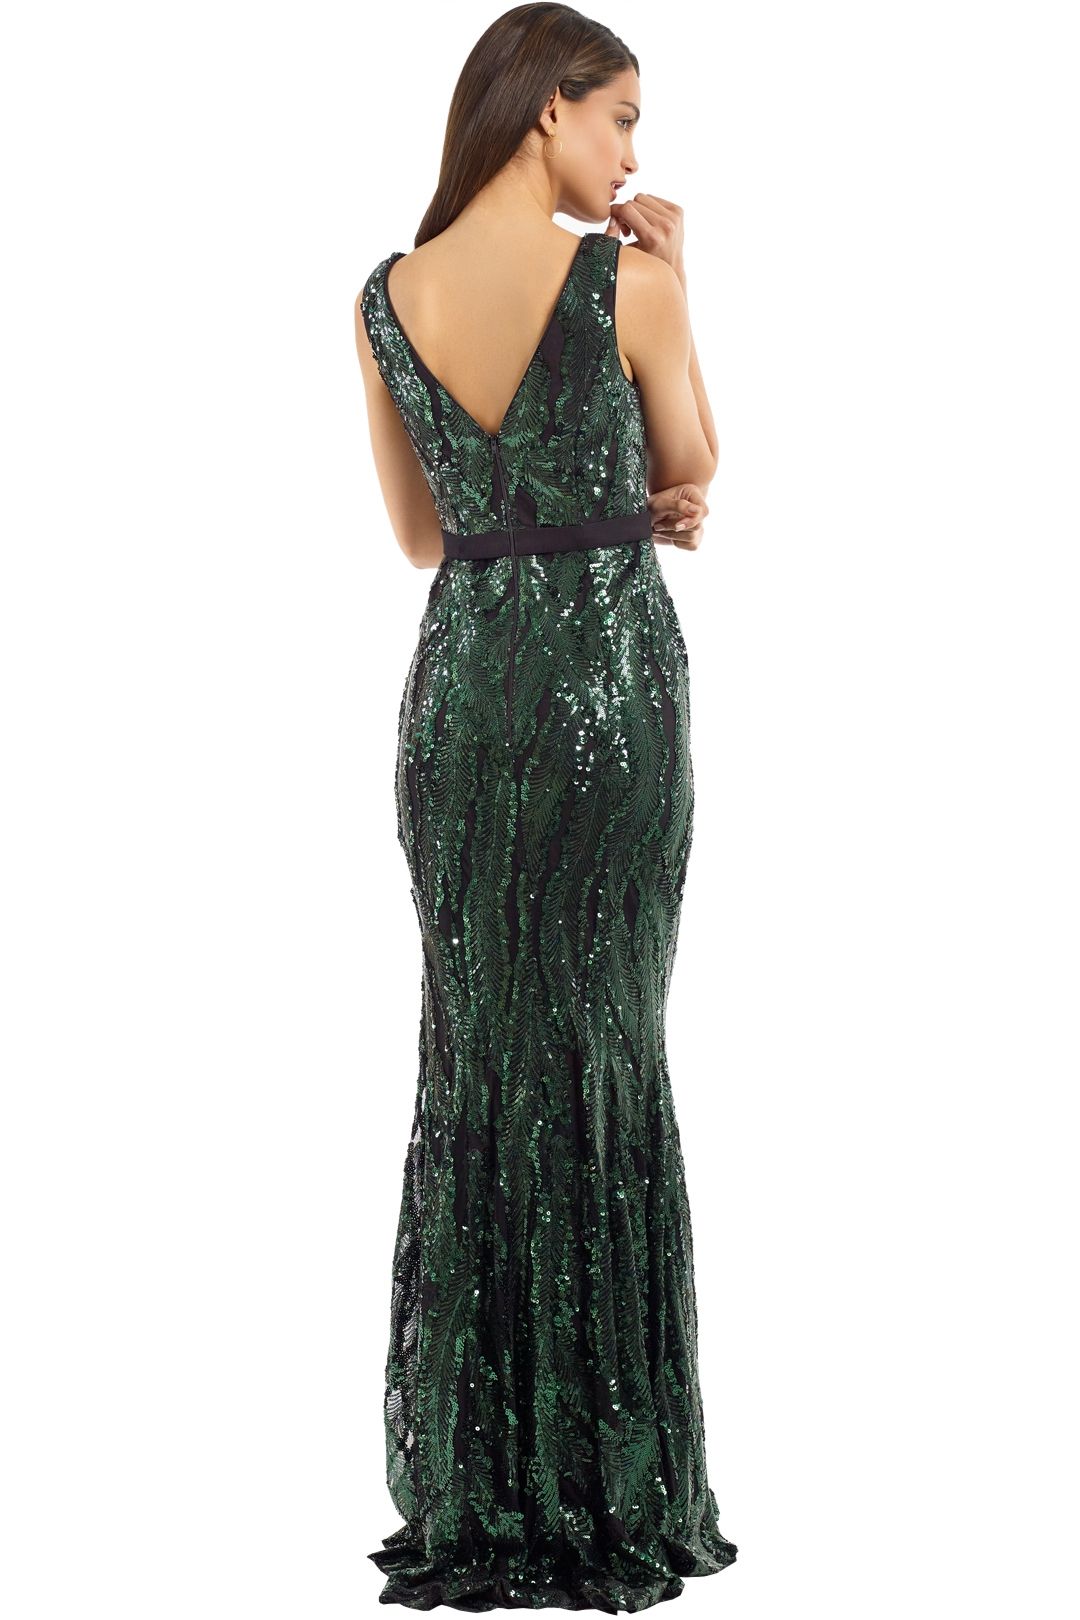 Jadore - J9027 - Aria Gown - Forest - Back